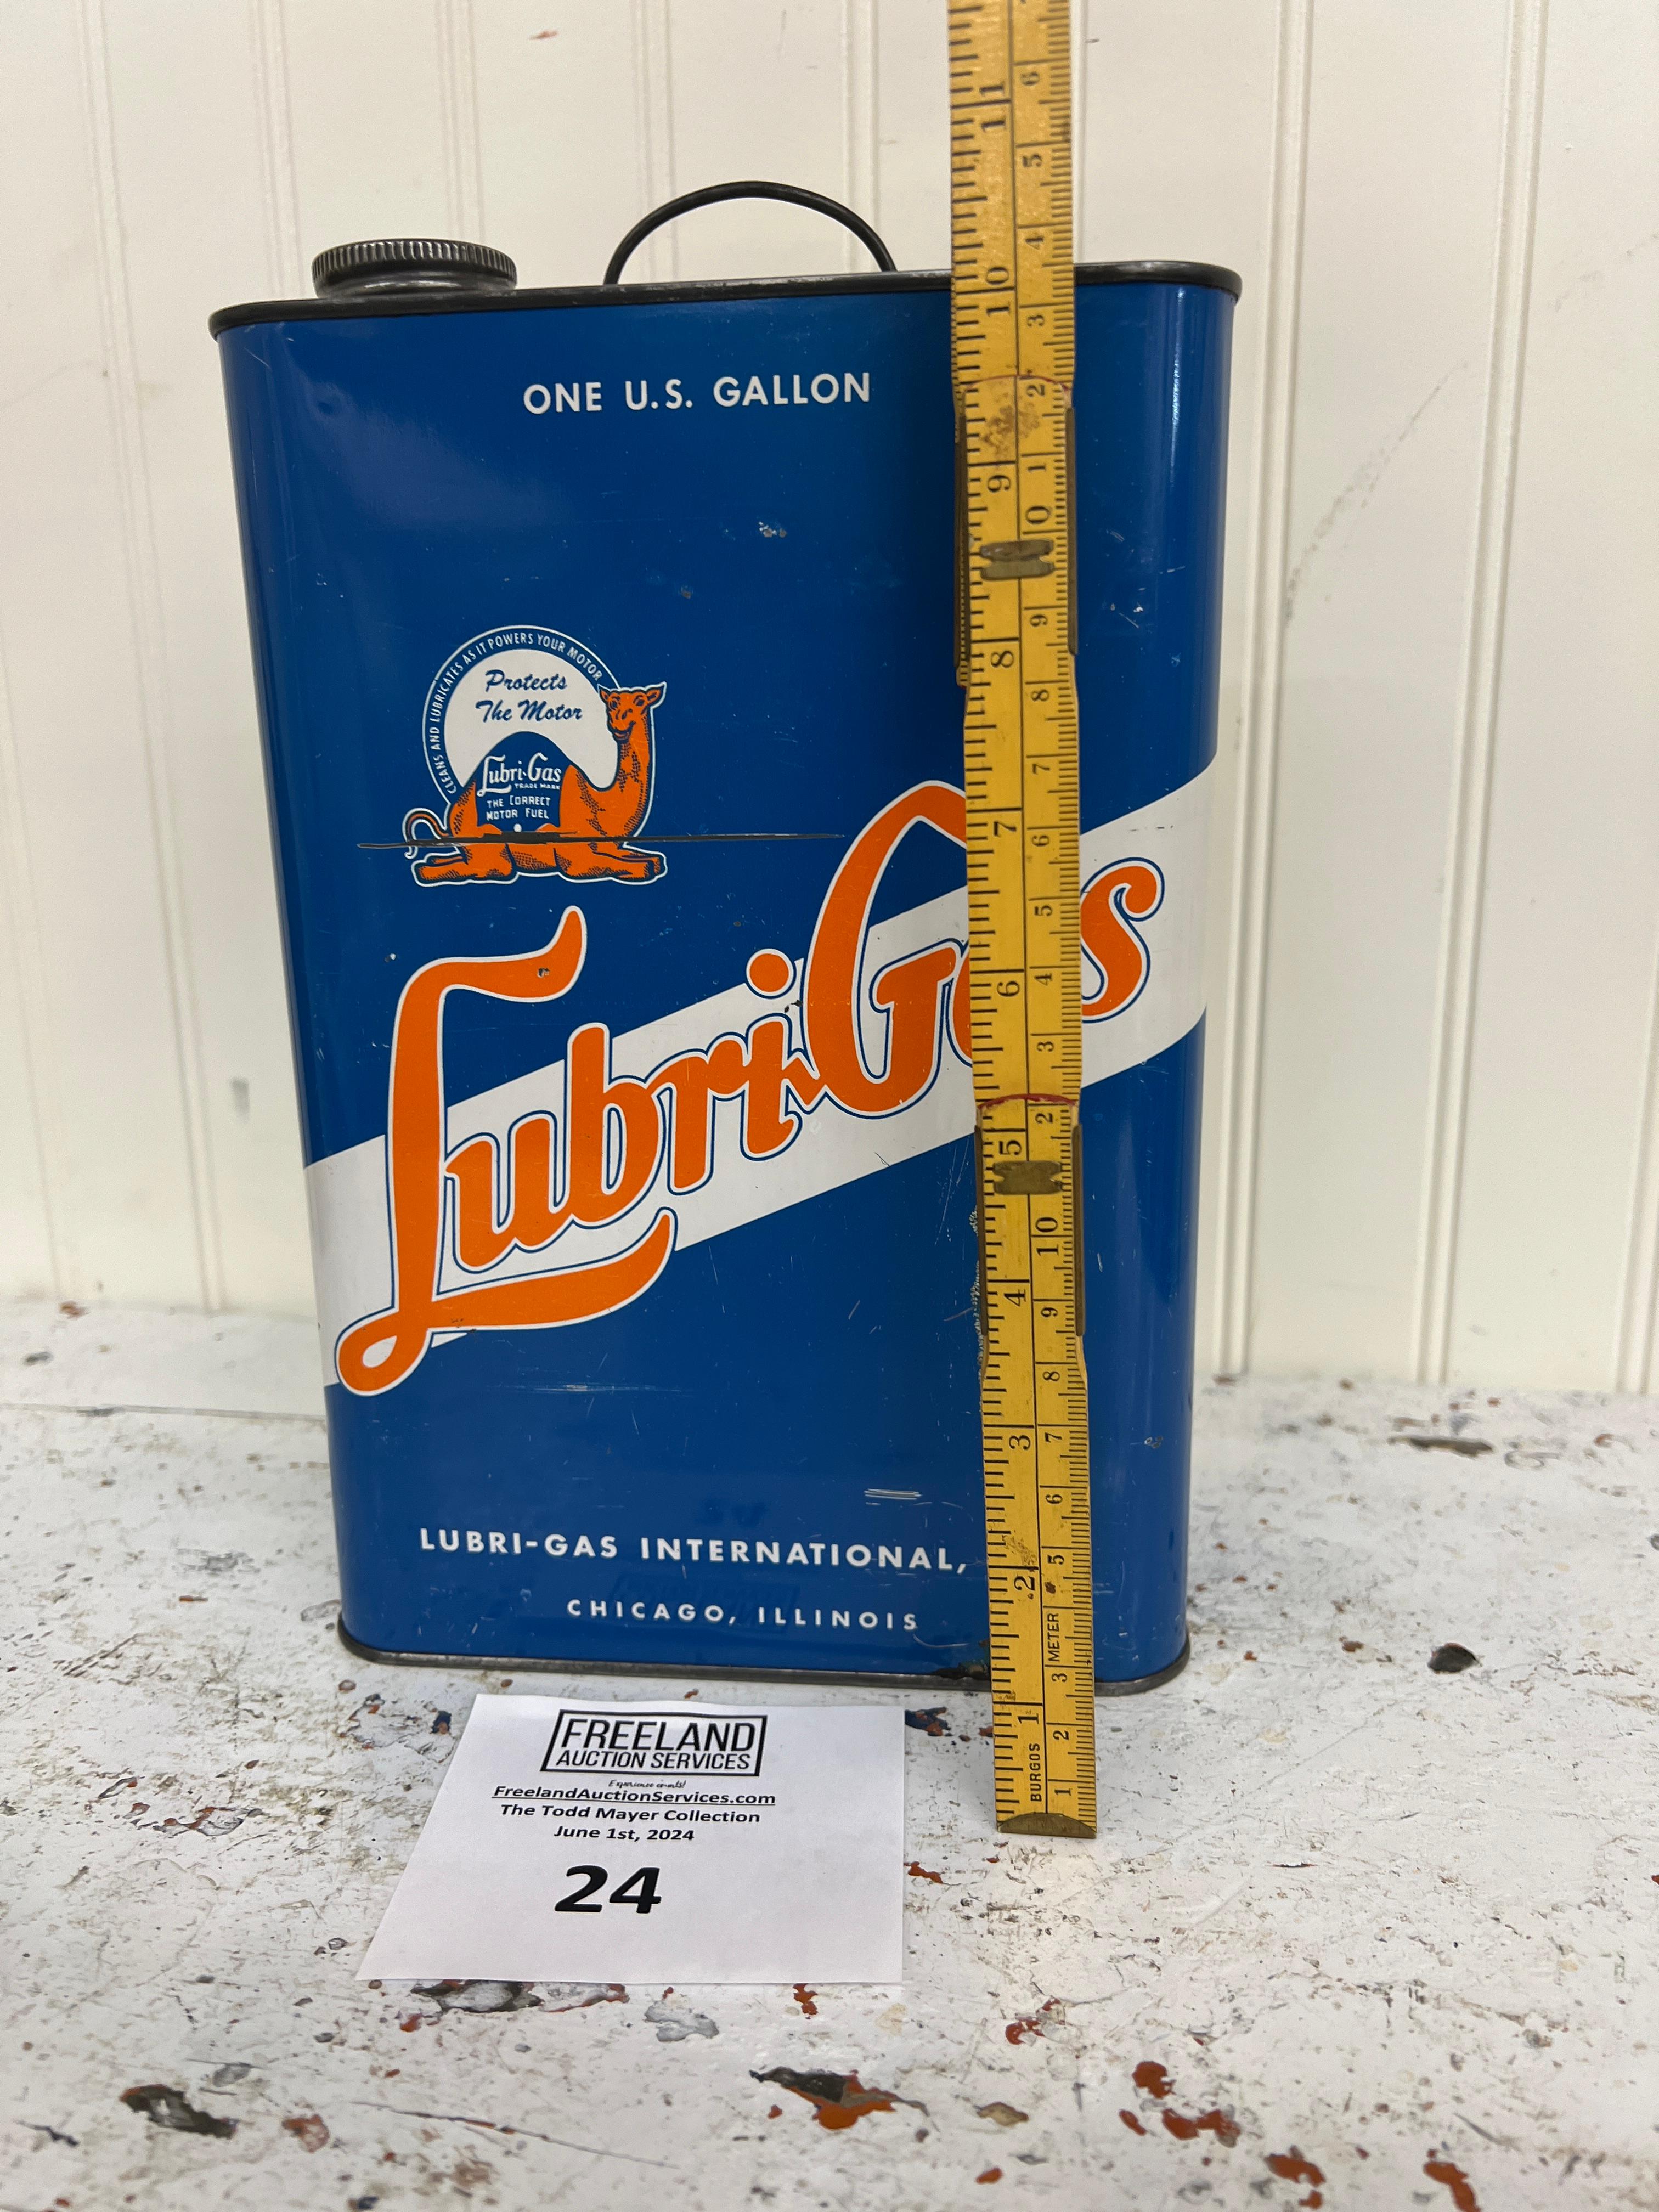 Lubri-Gas one gallon advertising can with CAMEL logo